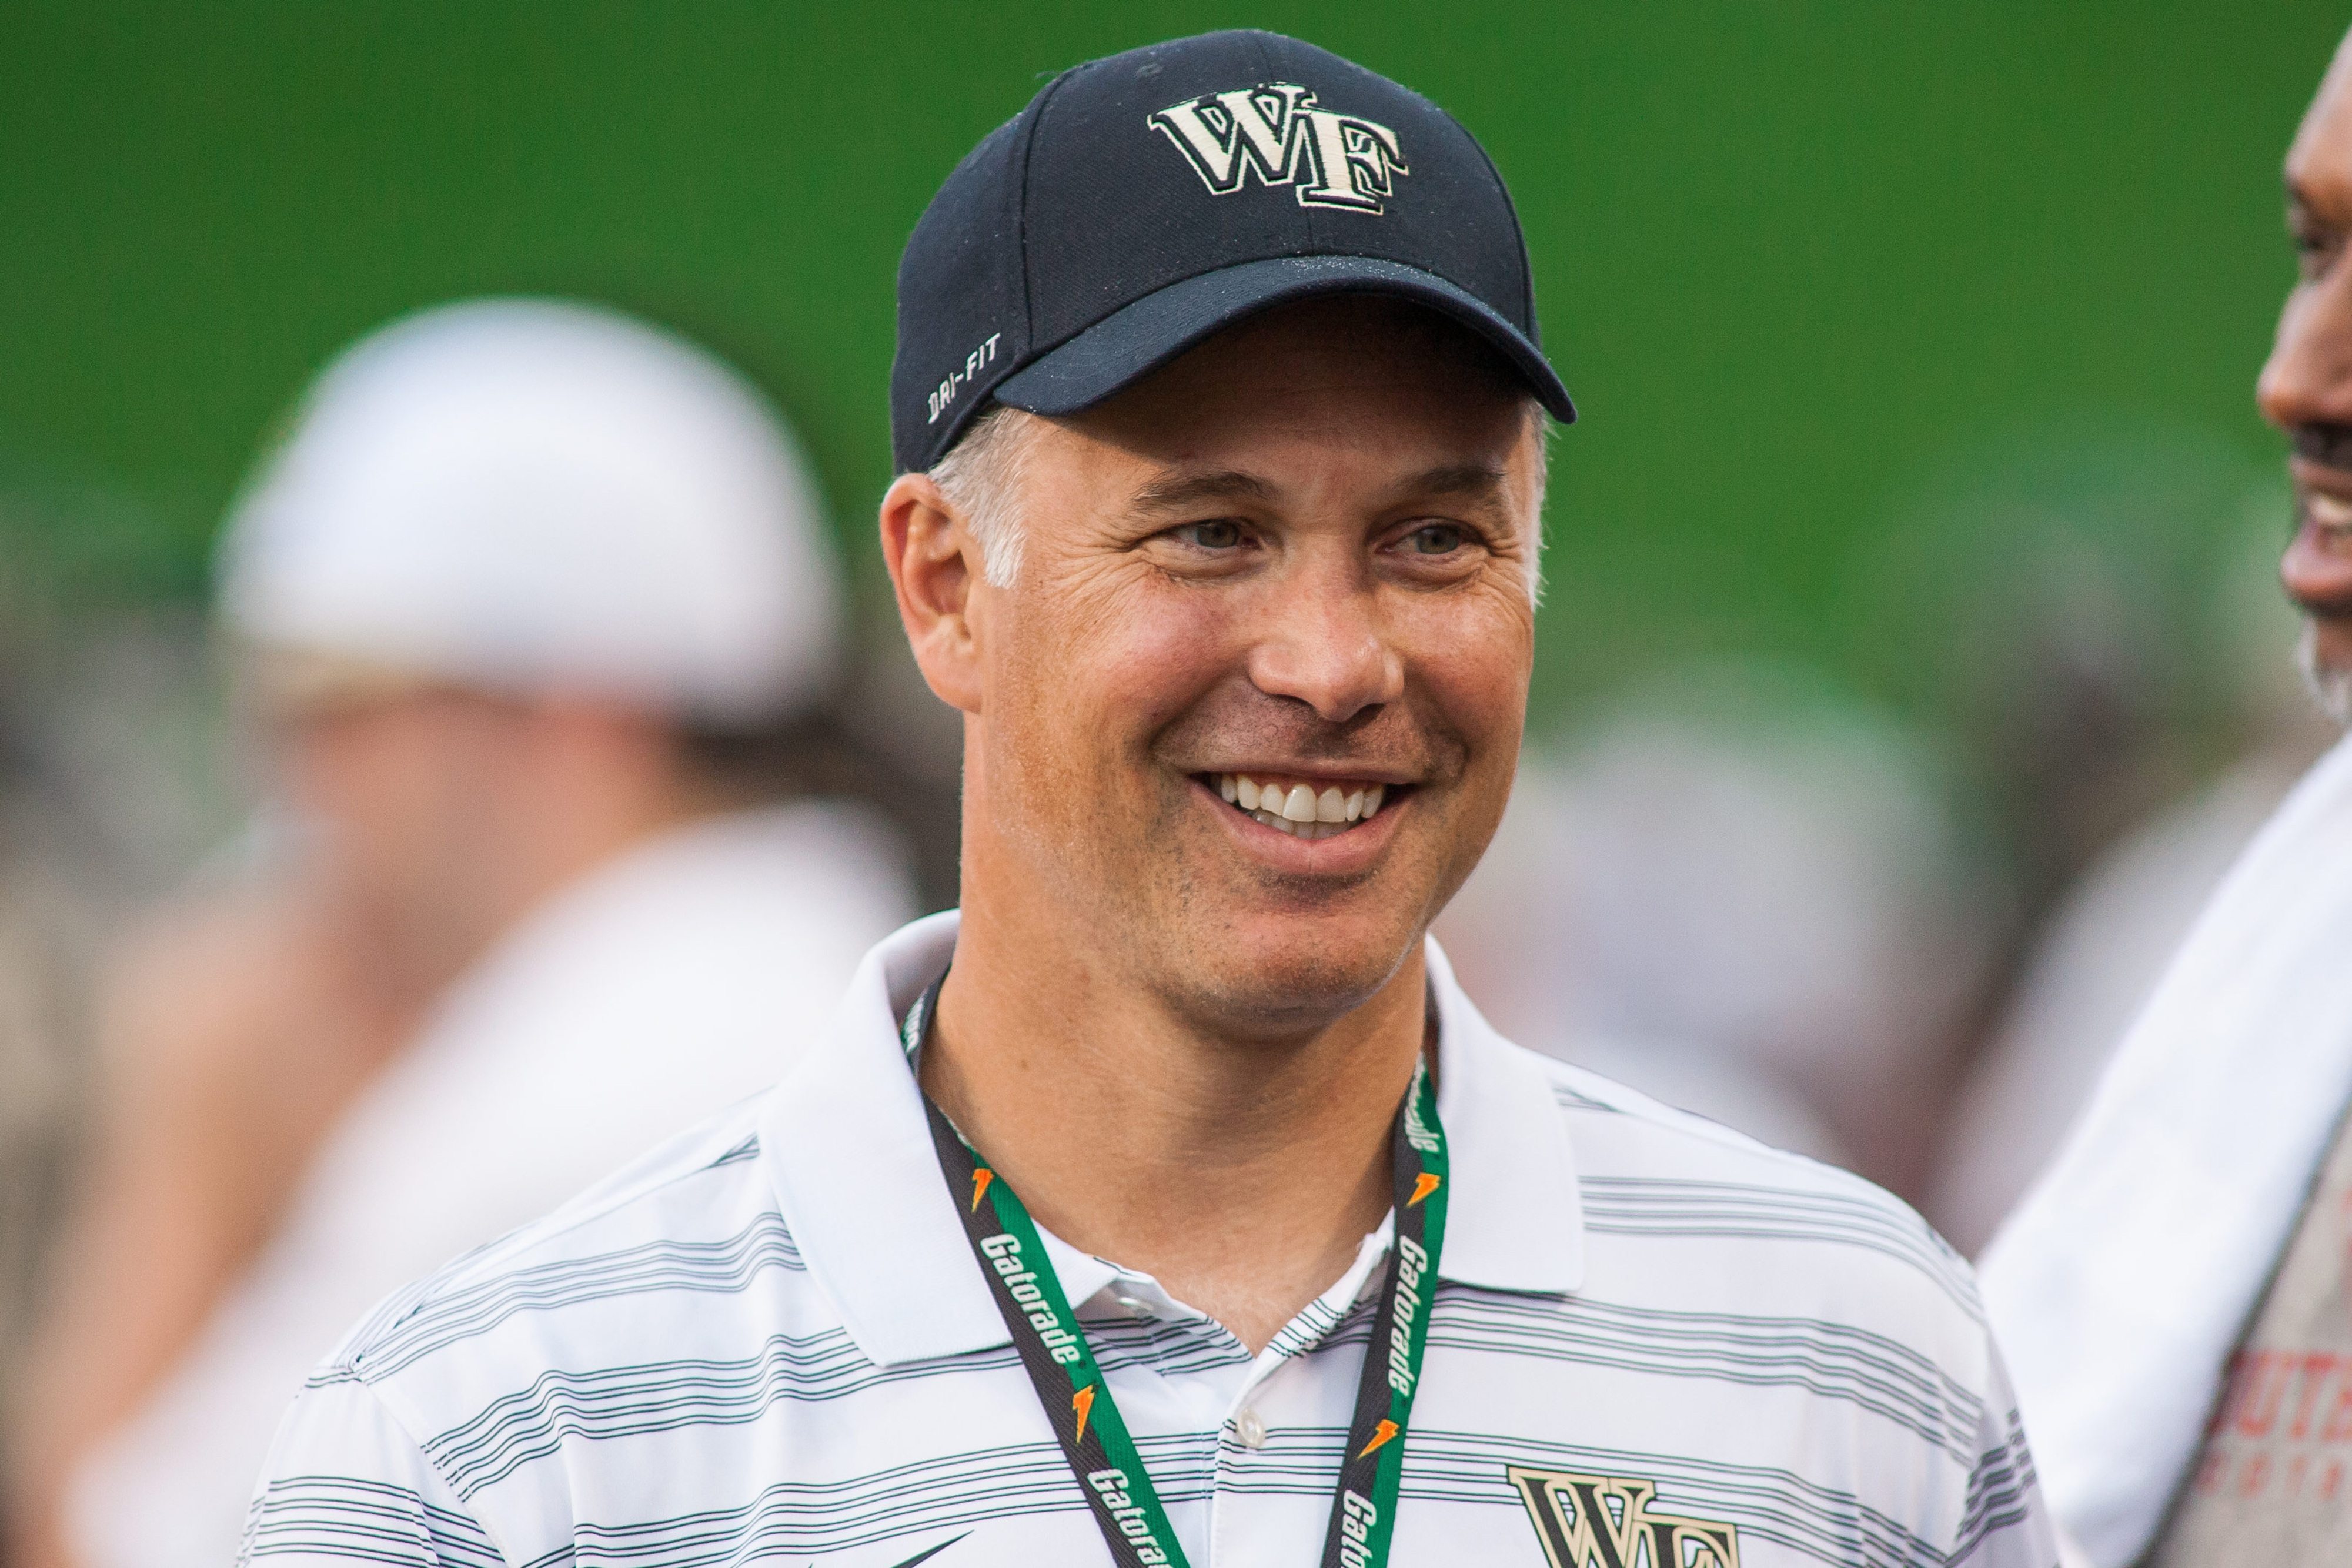 Dave Clawson helped turn BGSU aroun, winning the MAC Championship in 2013. He is now in Wake Forest.